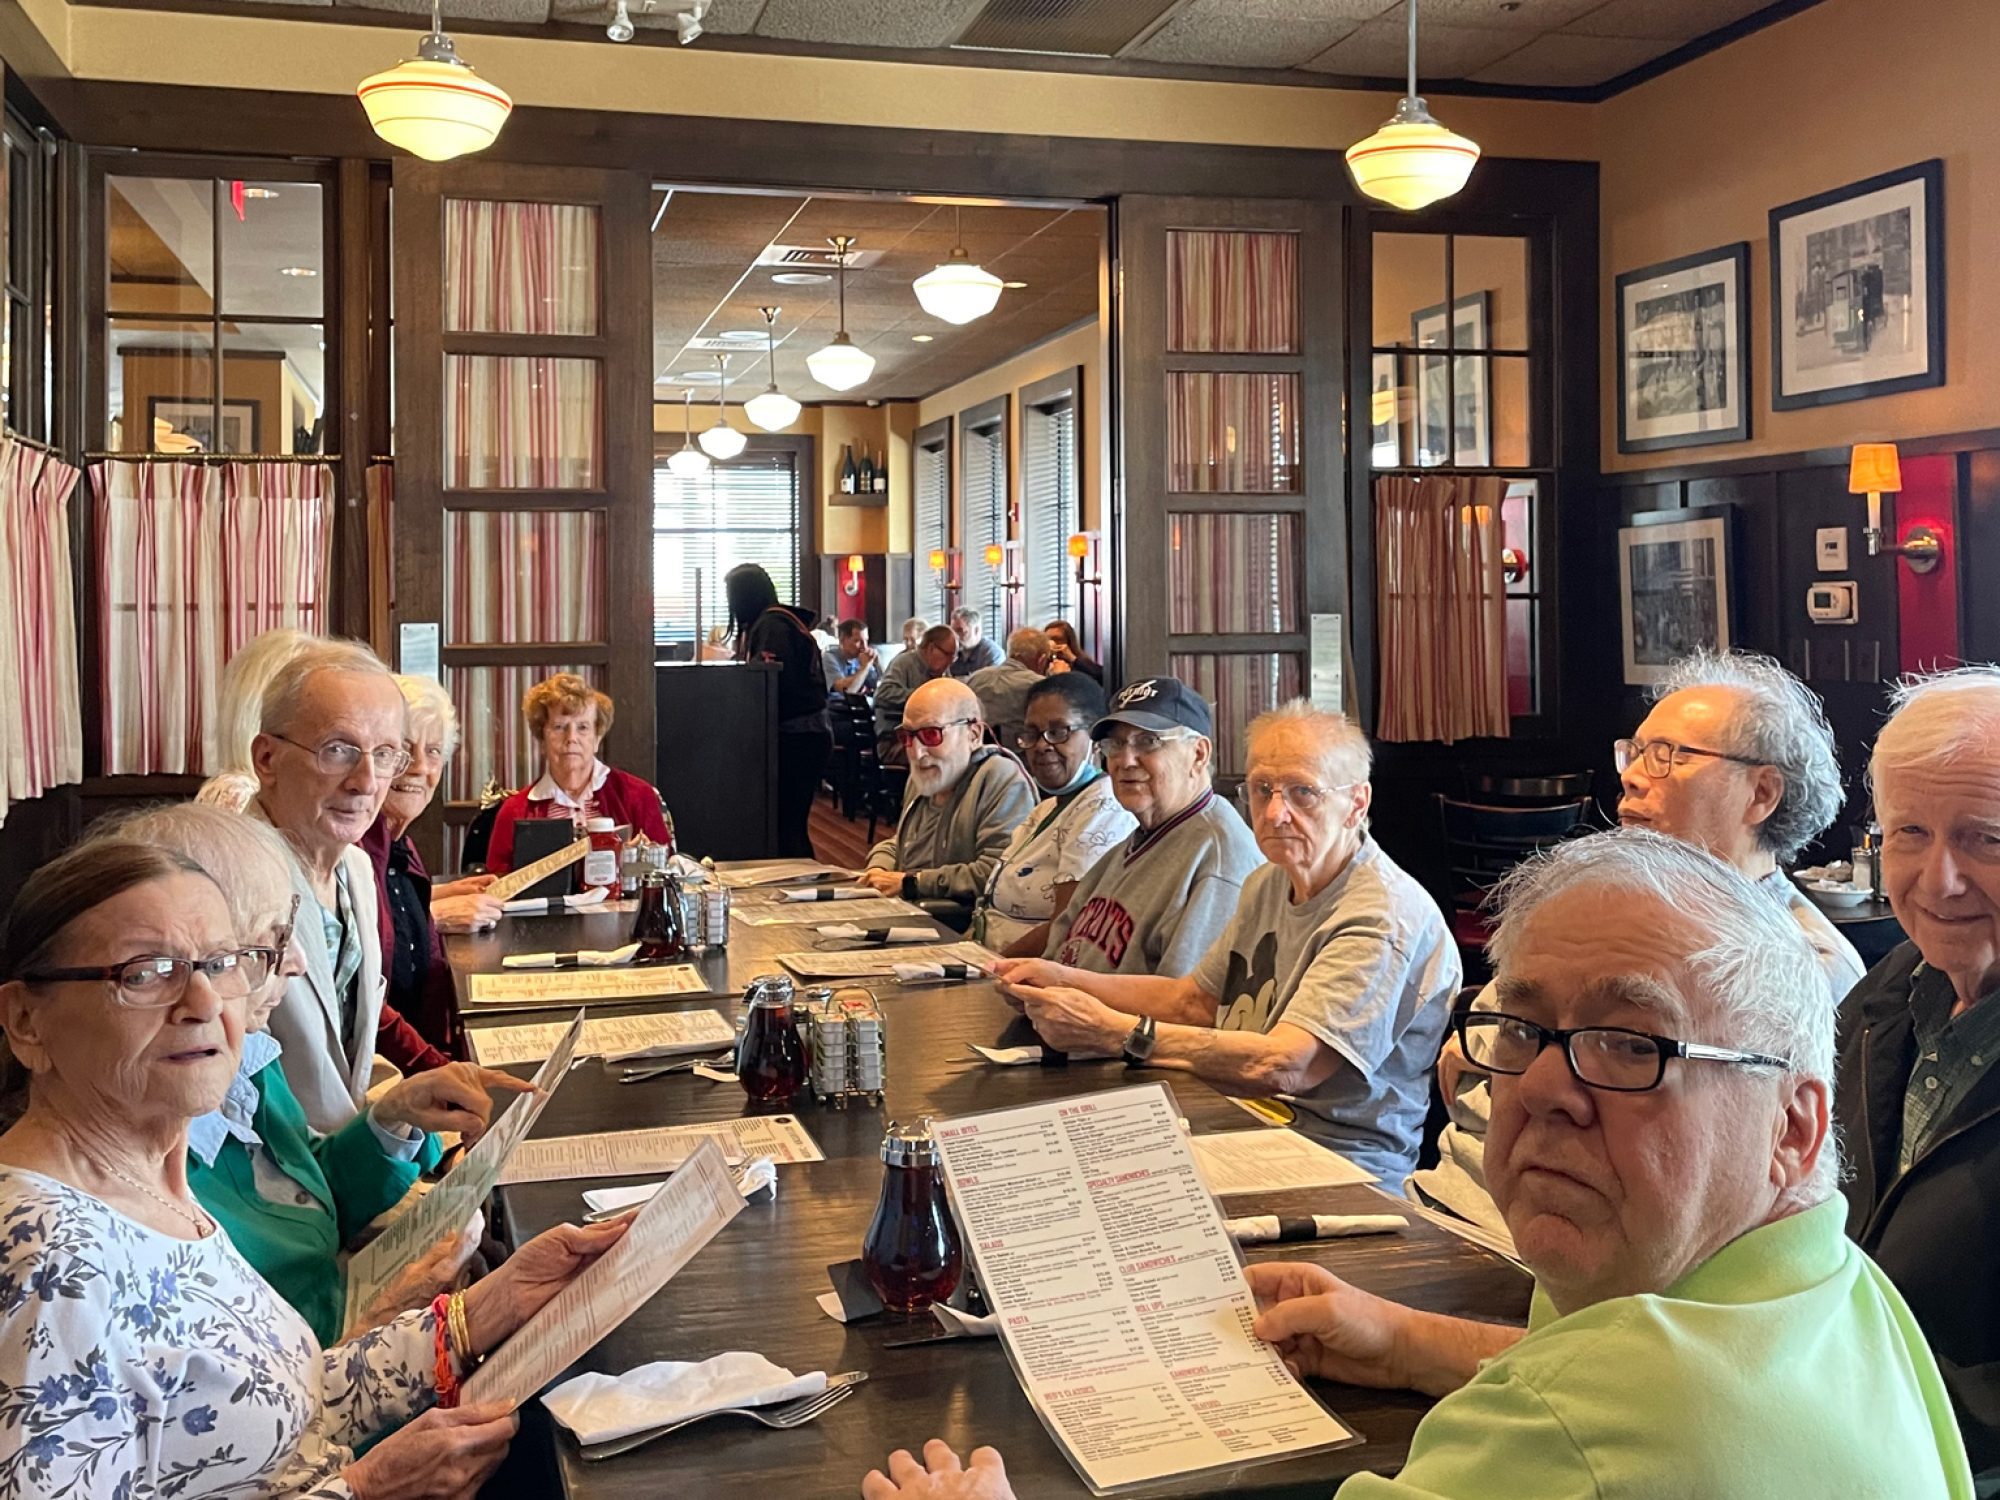 Peabody Campus Legacy residents enjoy a great lunch out at Reds restaurant. Pictured left to right are residents Marianne P, Barbara M, Bob S, Pat B, Howard R, Mickie G, Barb B, James S